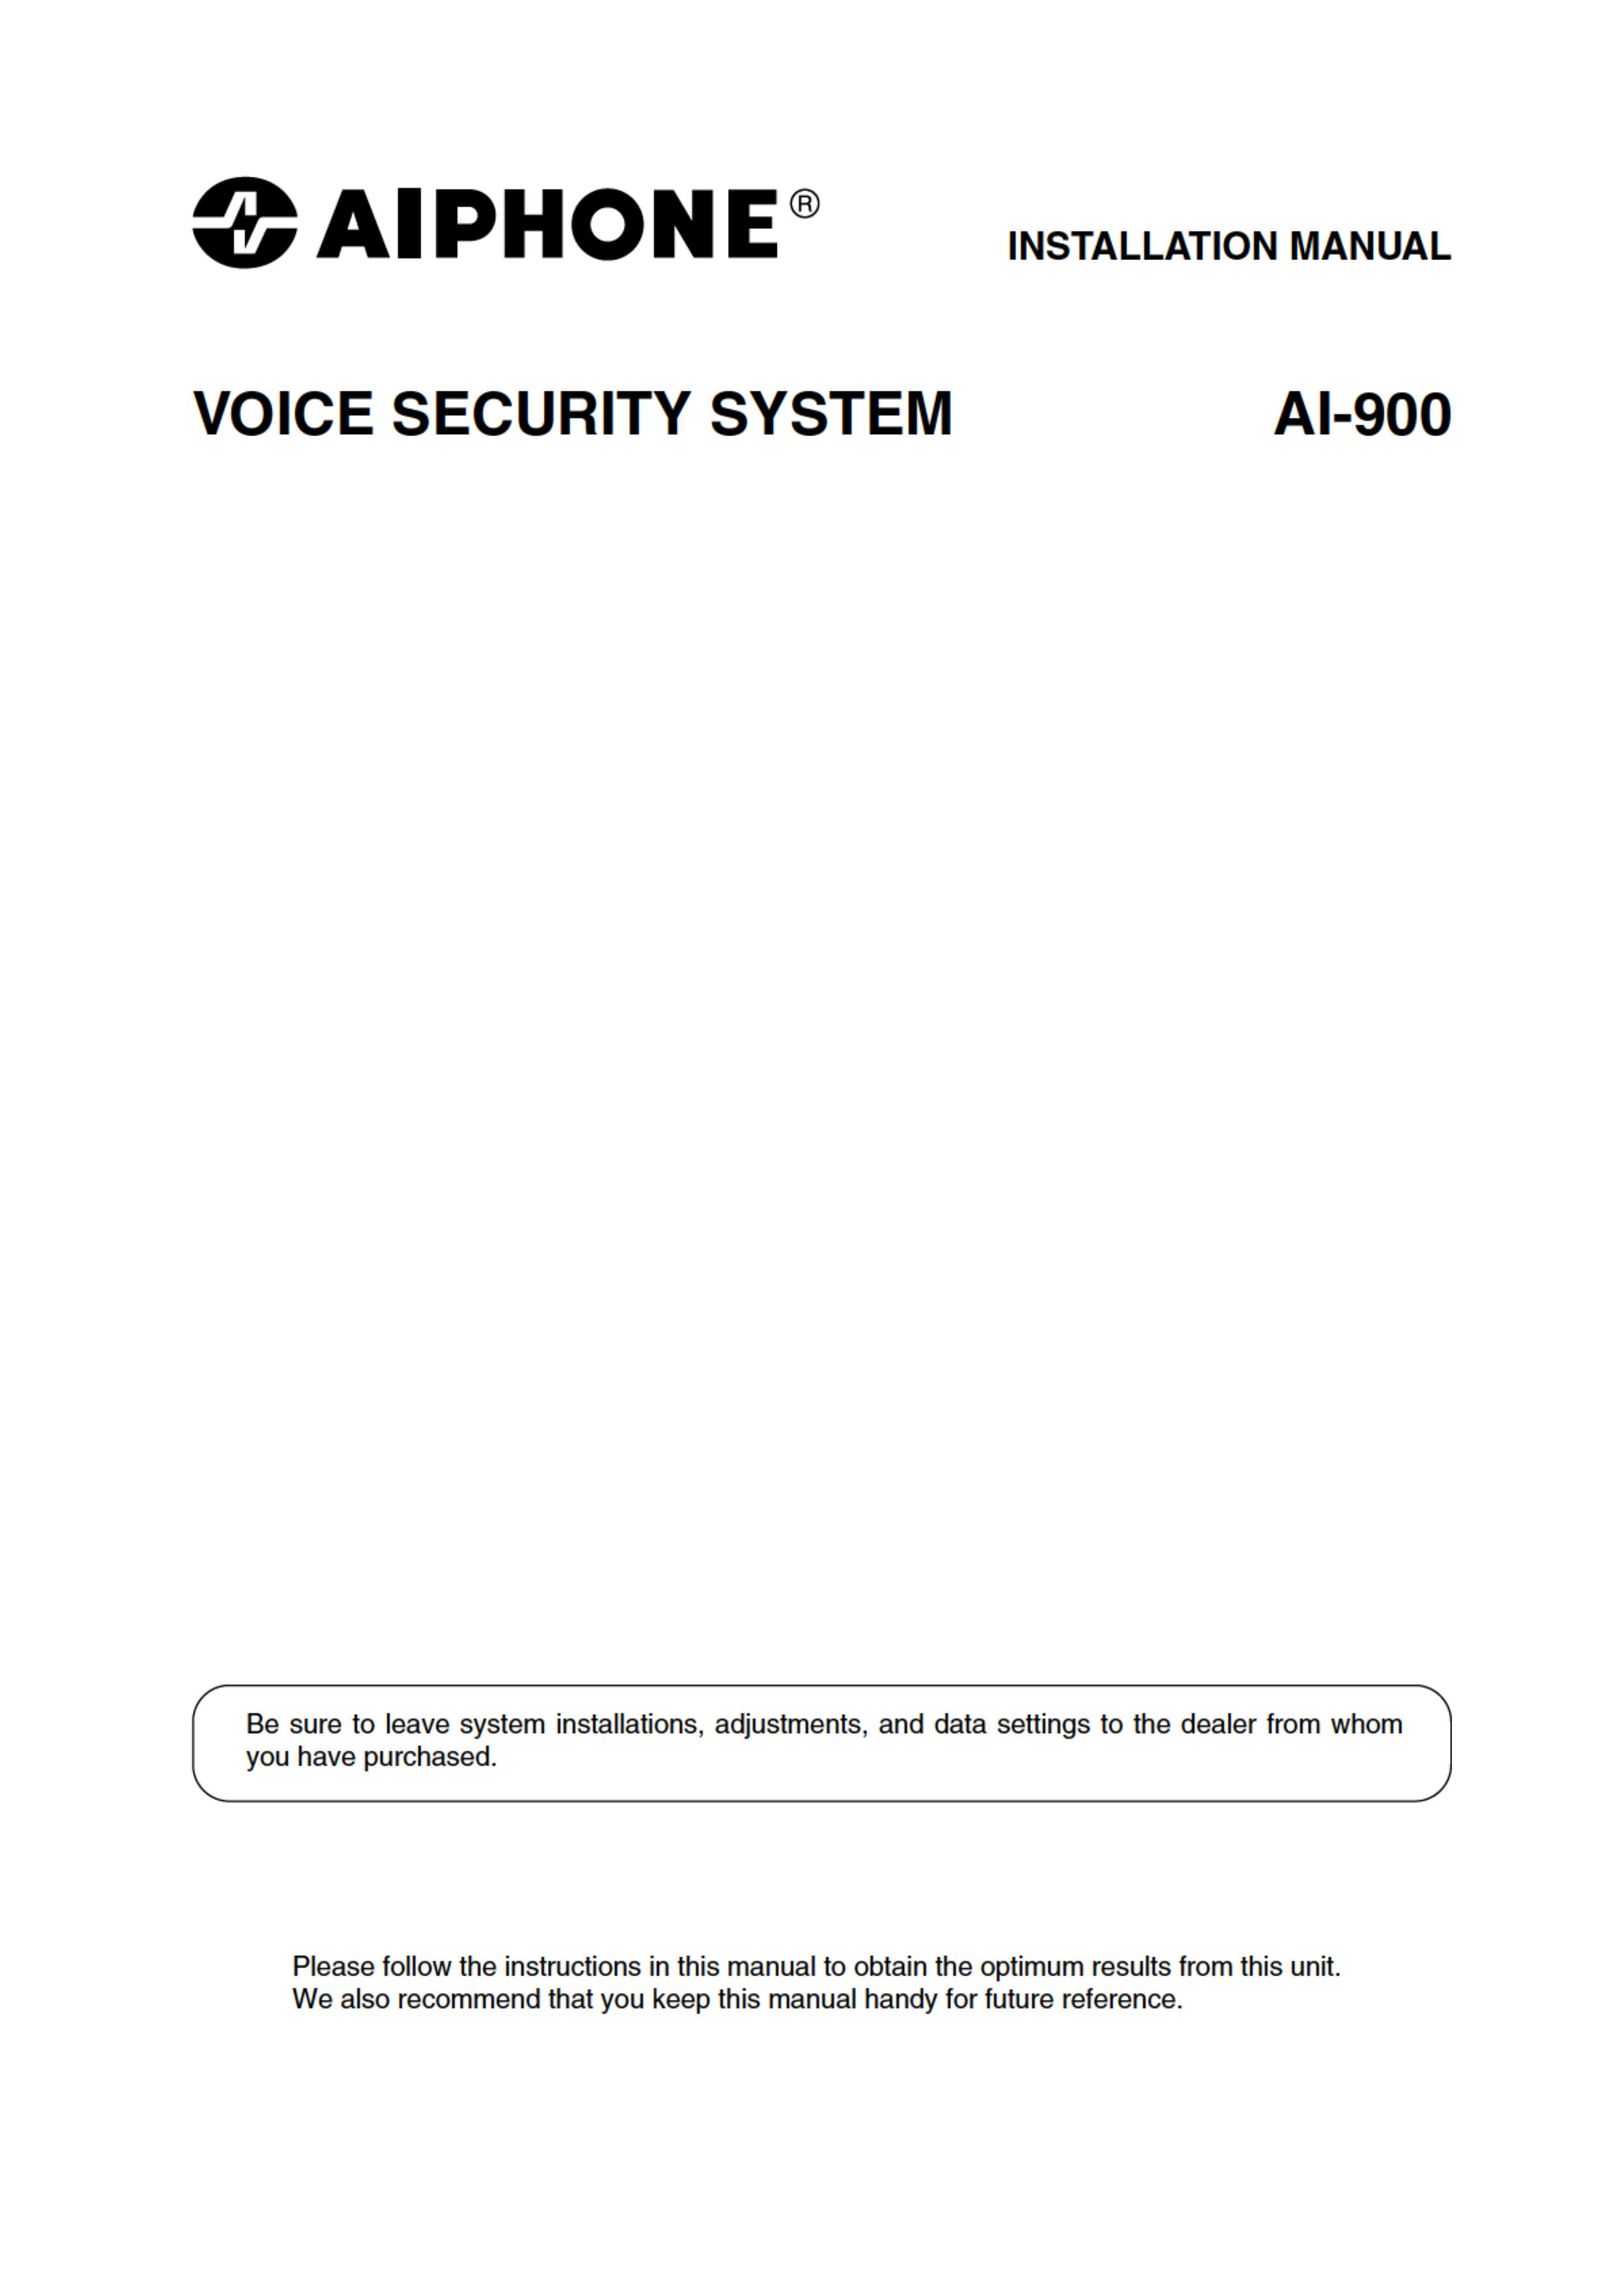 Aiphone AI-900 Home Security System User Manual